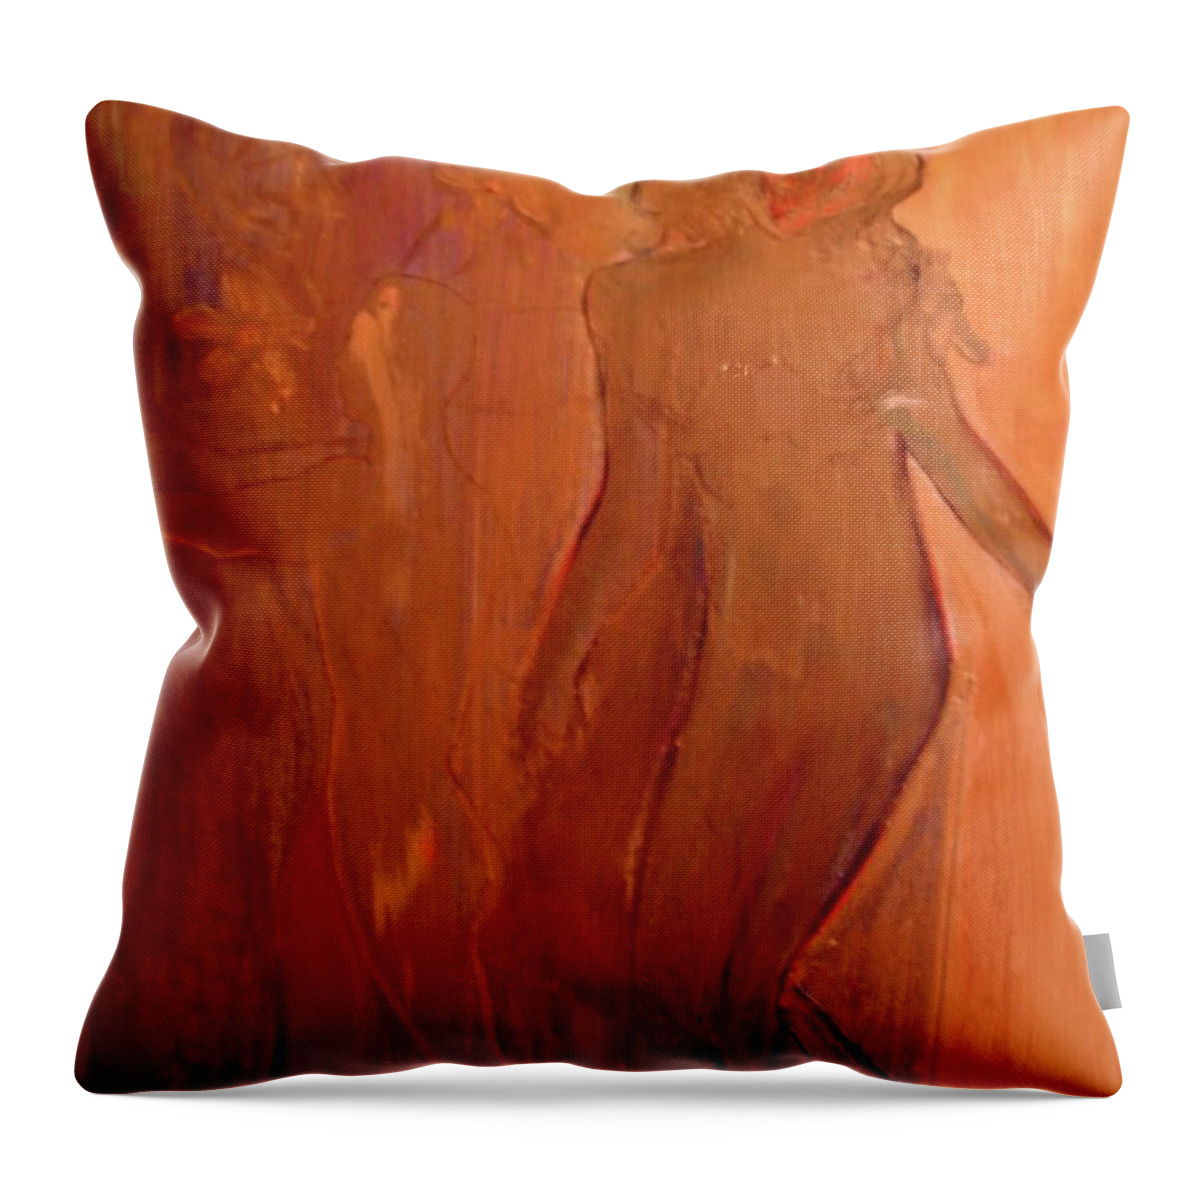 Oil On Canvas Throw Pillow featuring the painting The Seeding by Todd Krasovetz